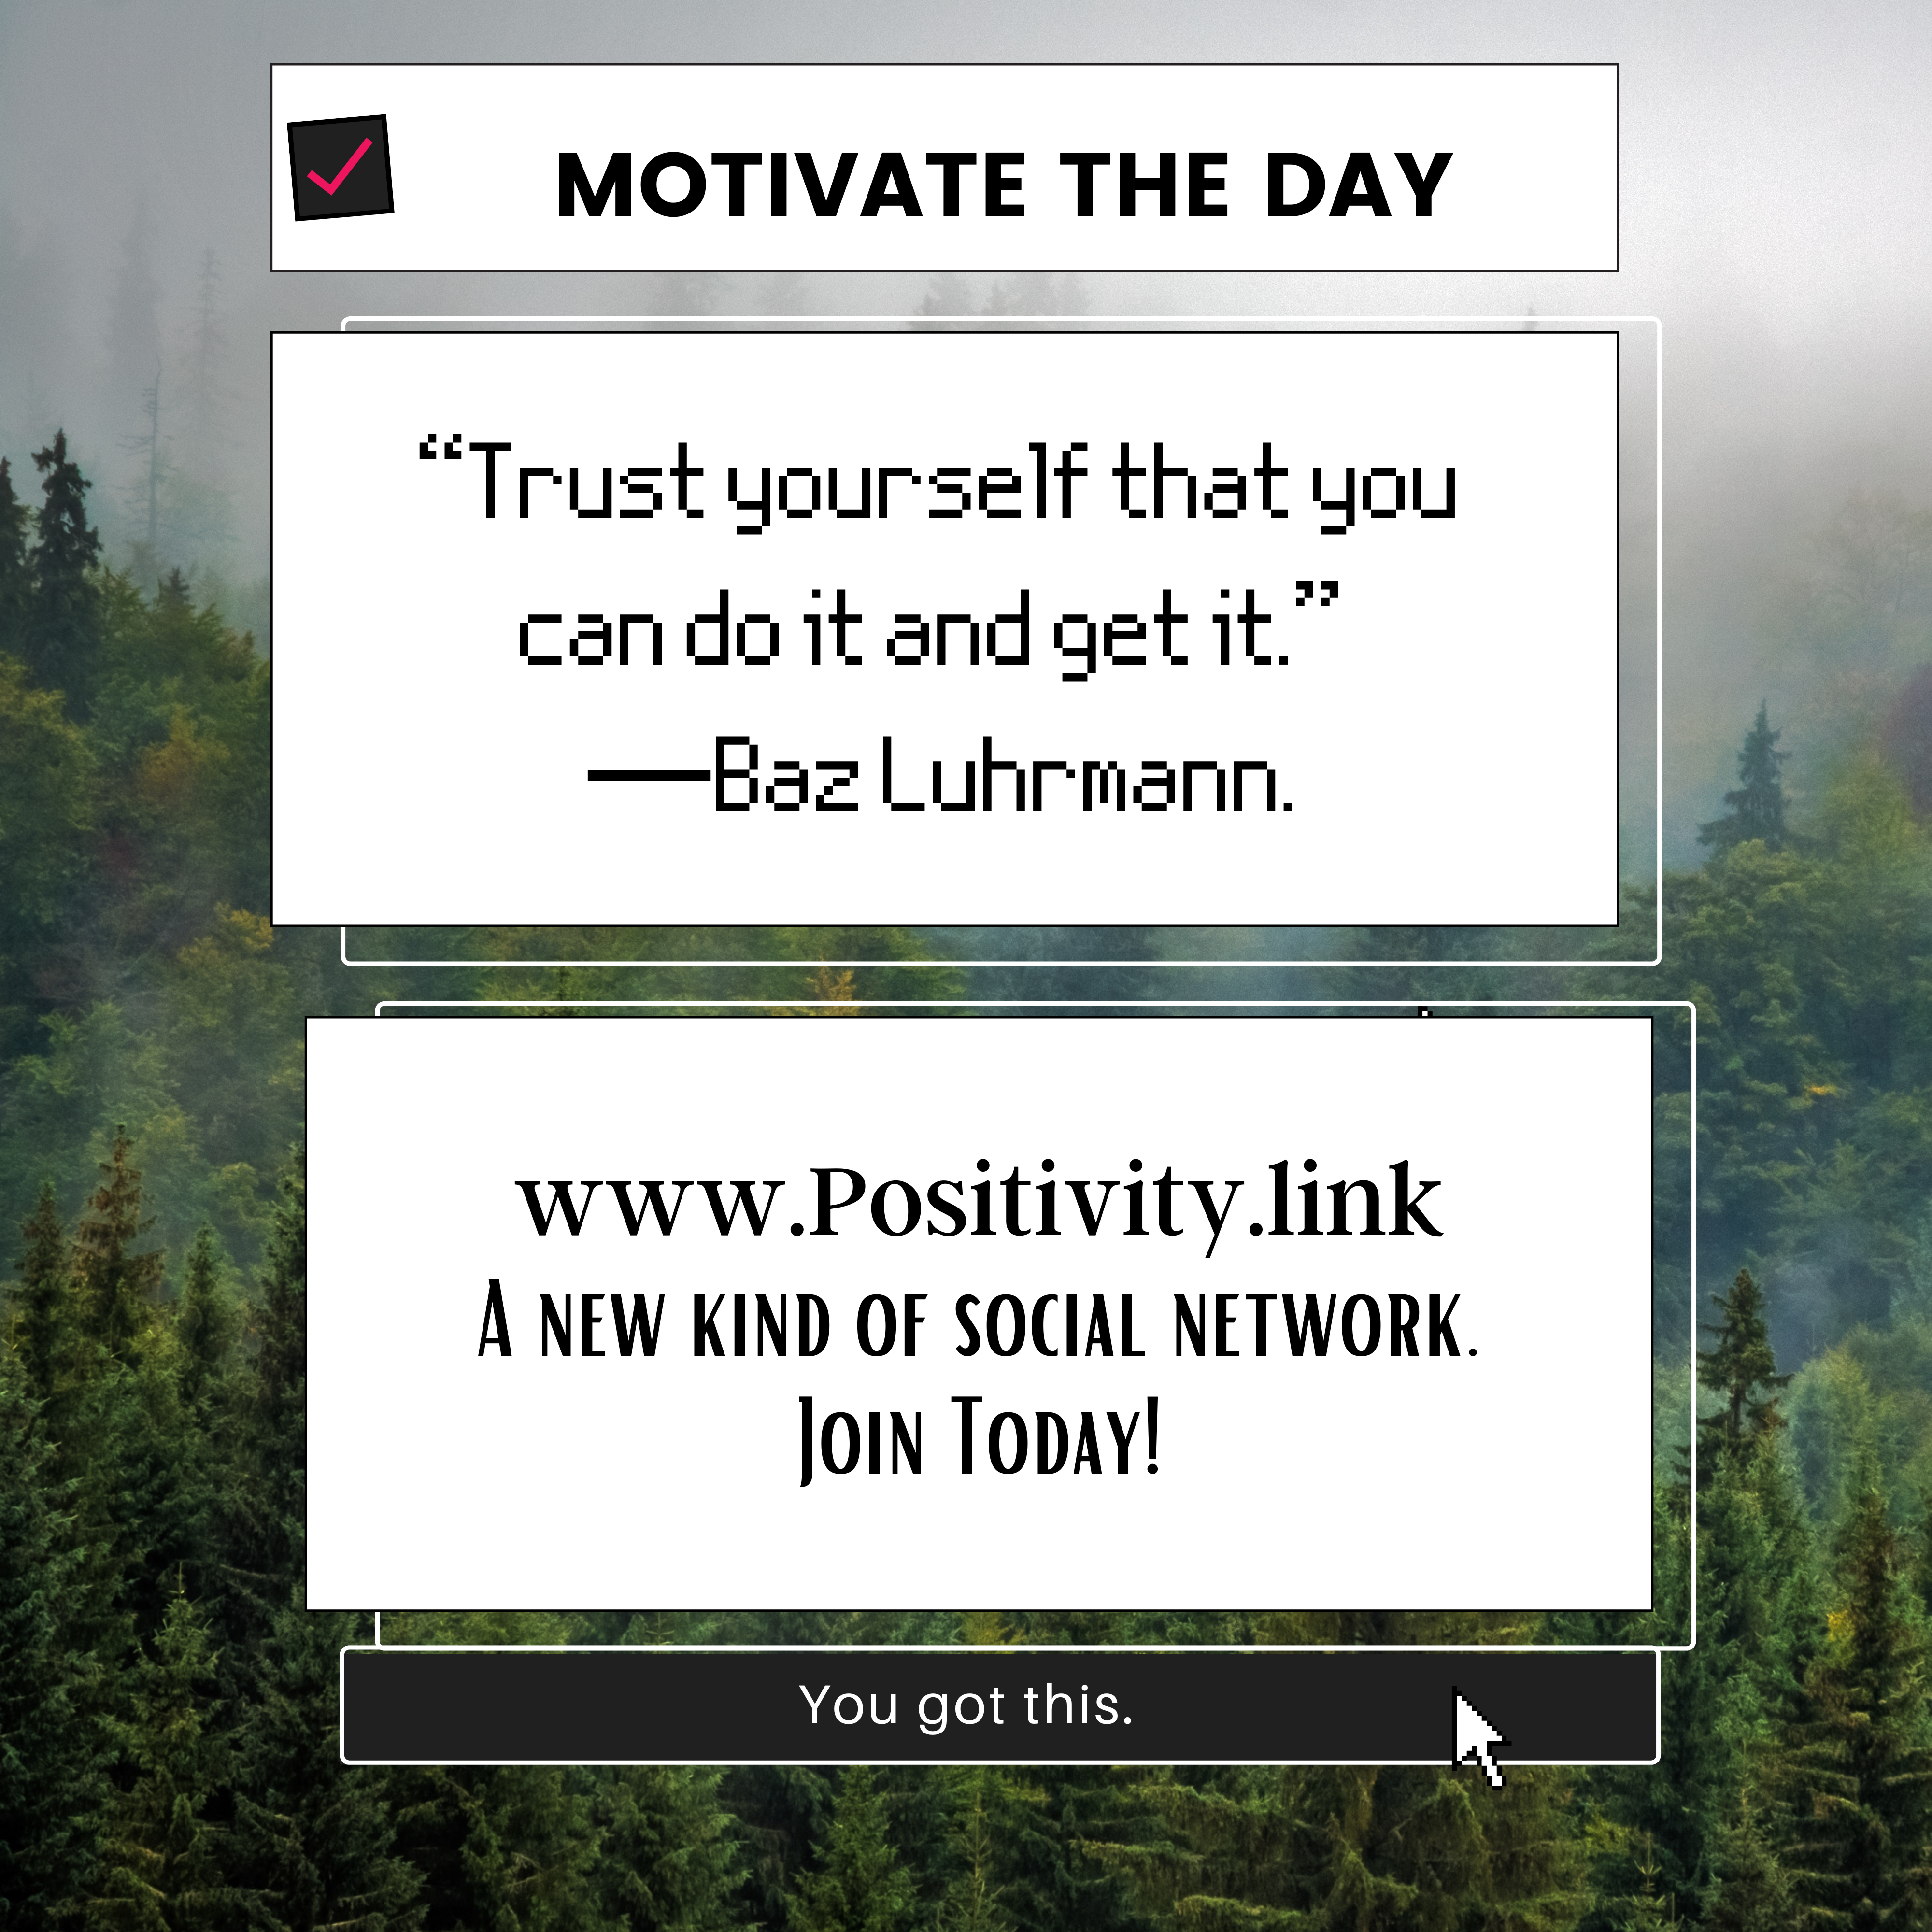 Motivate the Day